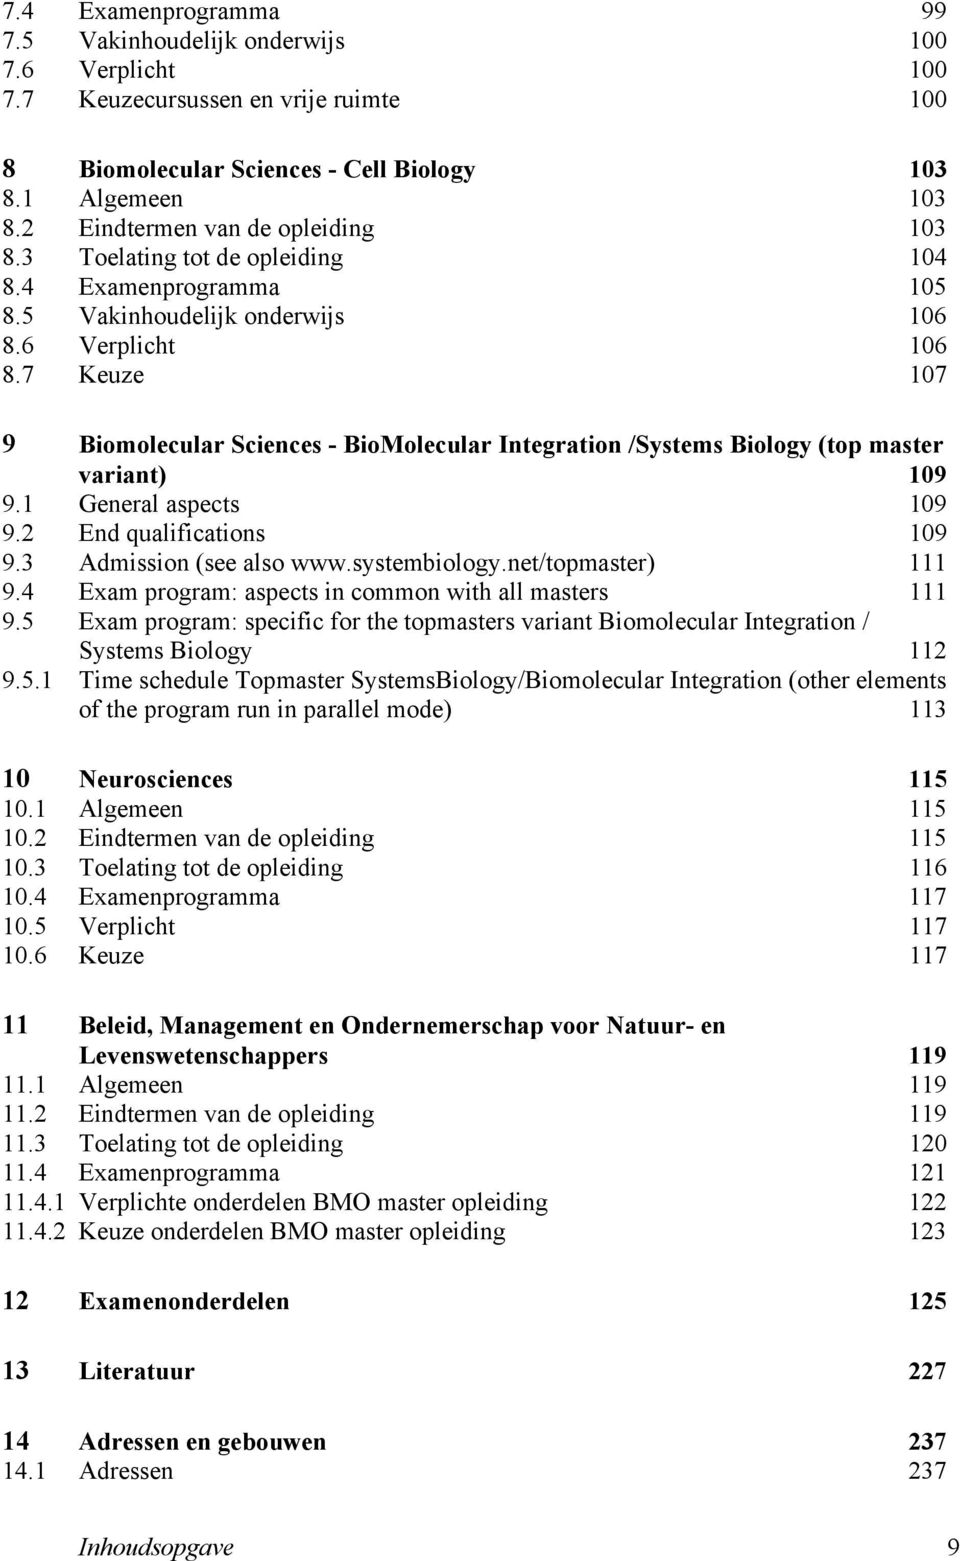 7 Keuze 107 9 Biomolecular Sciences - BioMolecular Integration /Systems Biology (top master variant) 109 9.1 General aspects 109 9.2 End qualifications 109 9.3 Admission (see also www.systembiology.